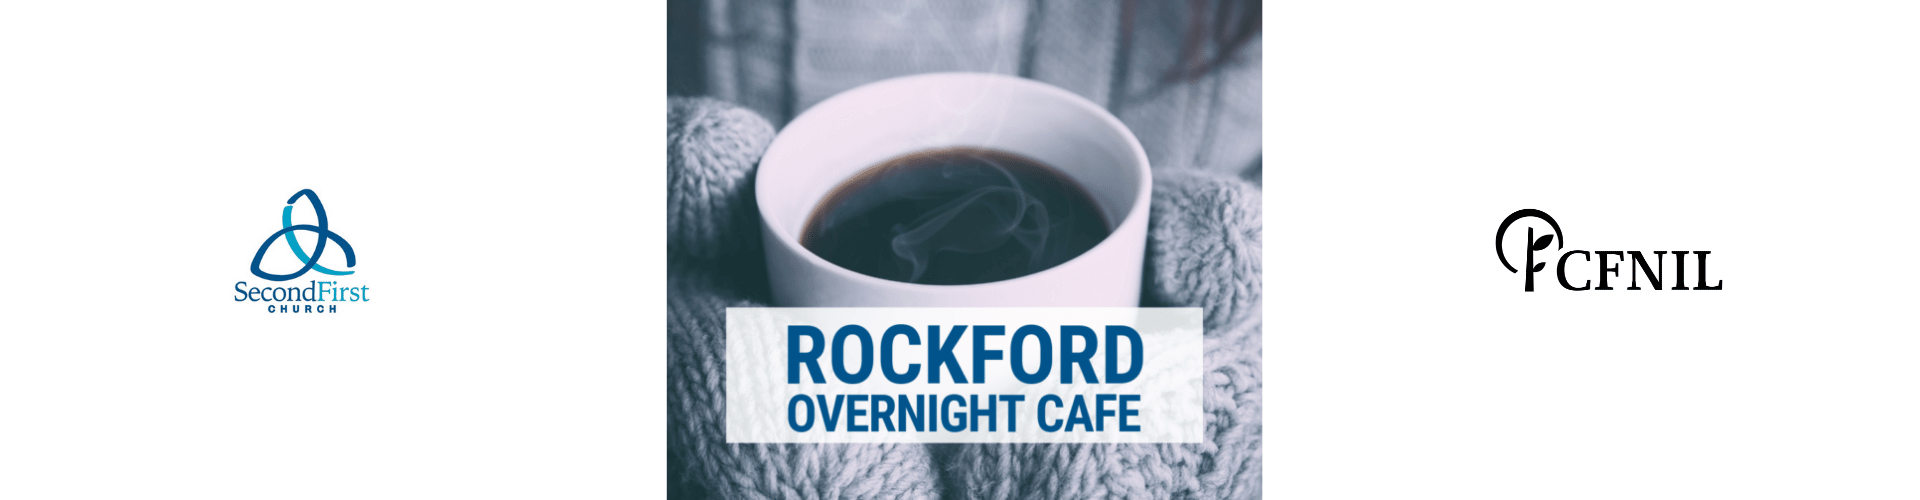 Rockford overnight Cafe. Picture of mittened hands holding a mug of coffee. Logos of Second First Church and CFNIL.